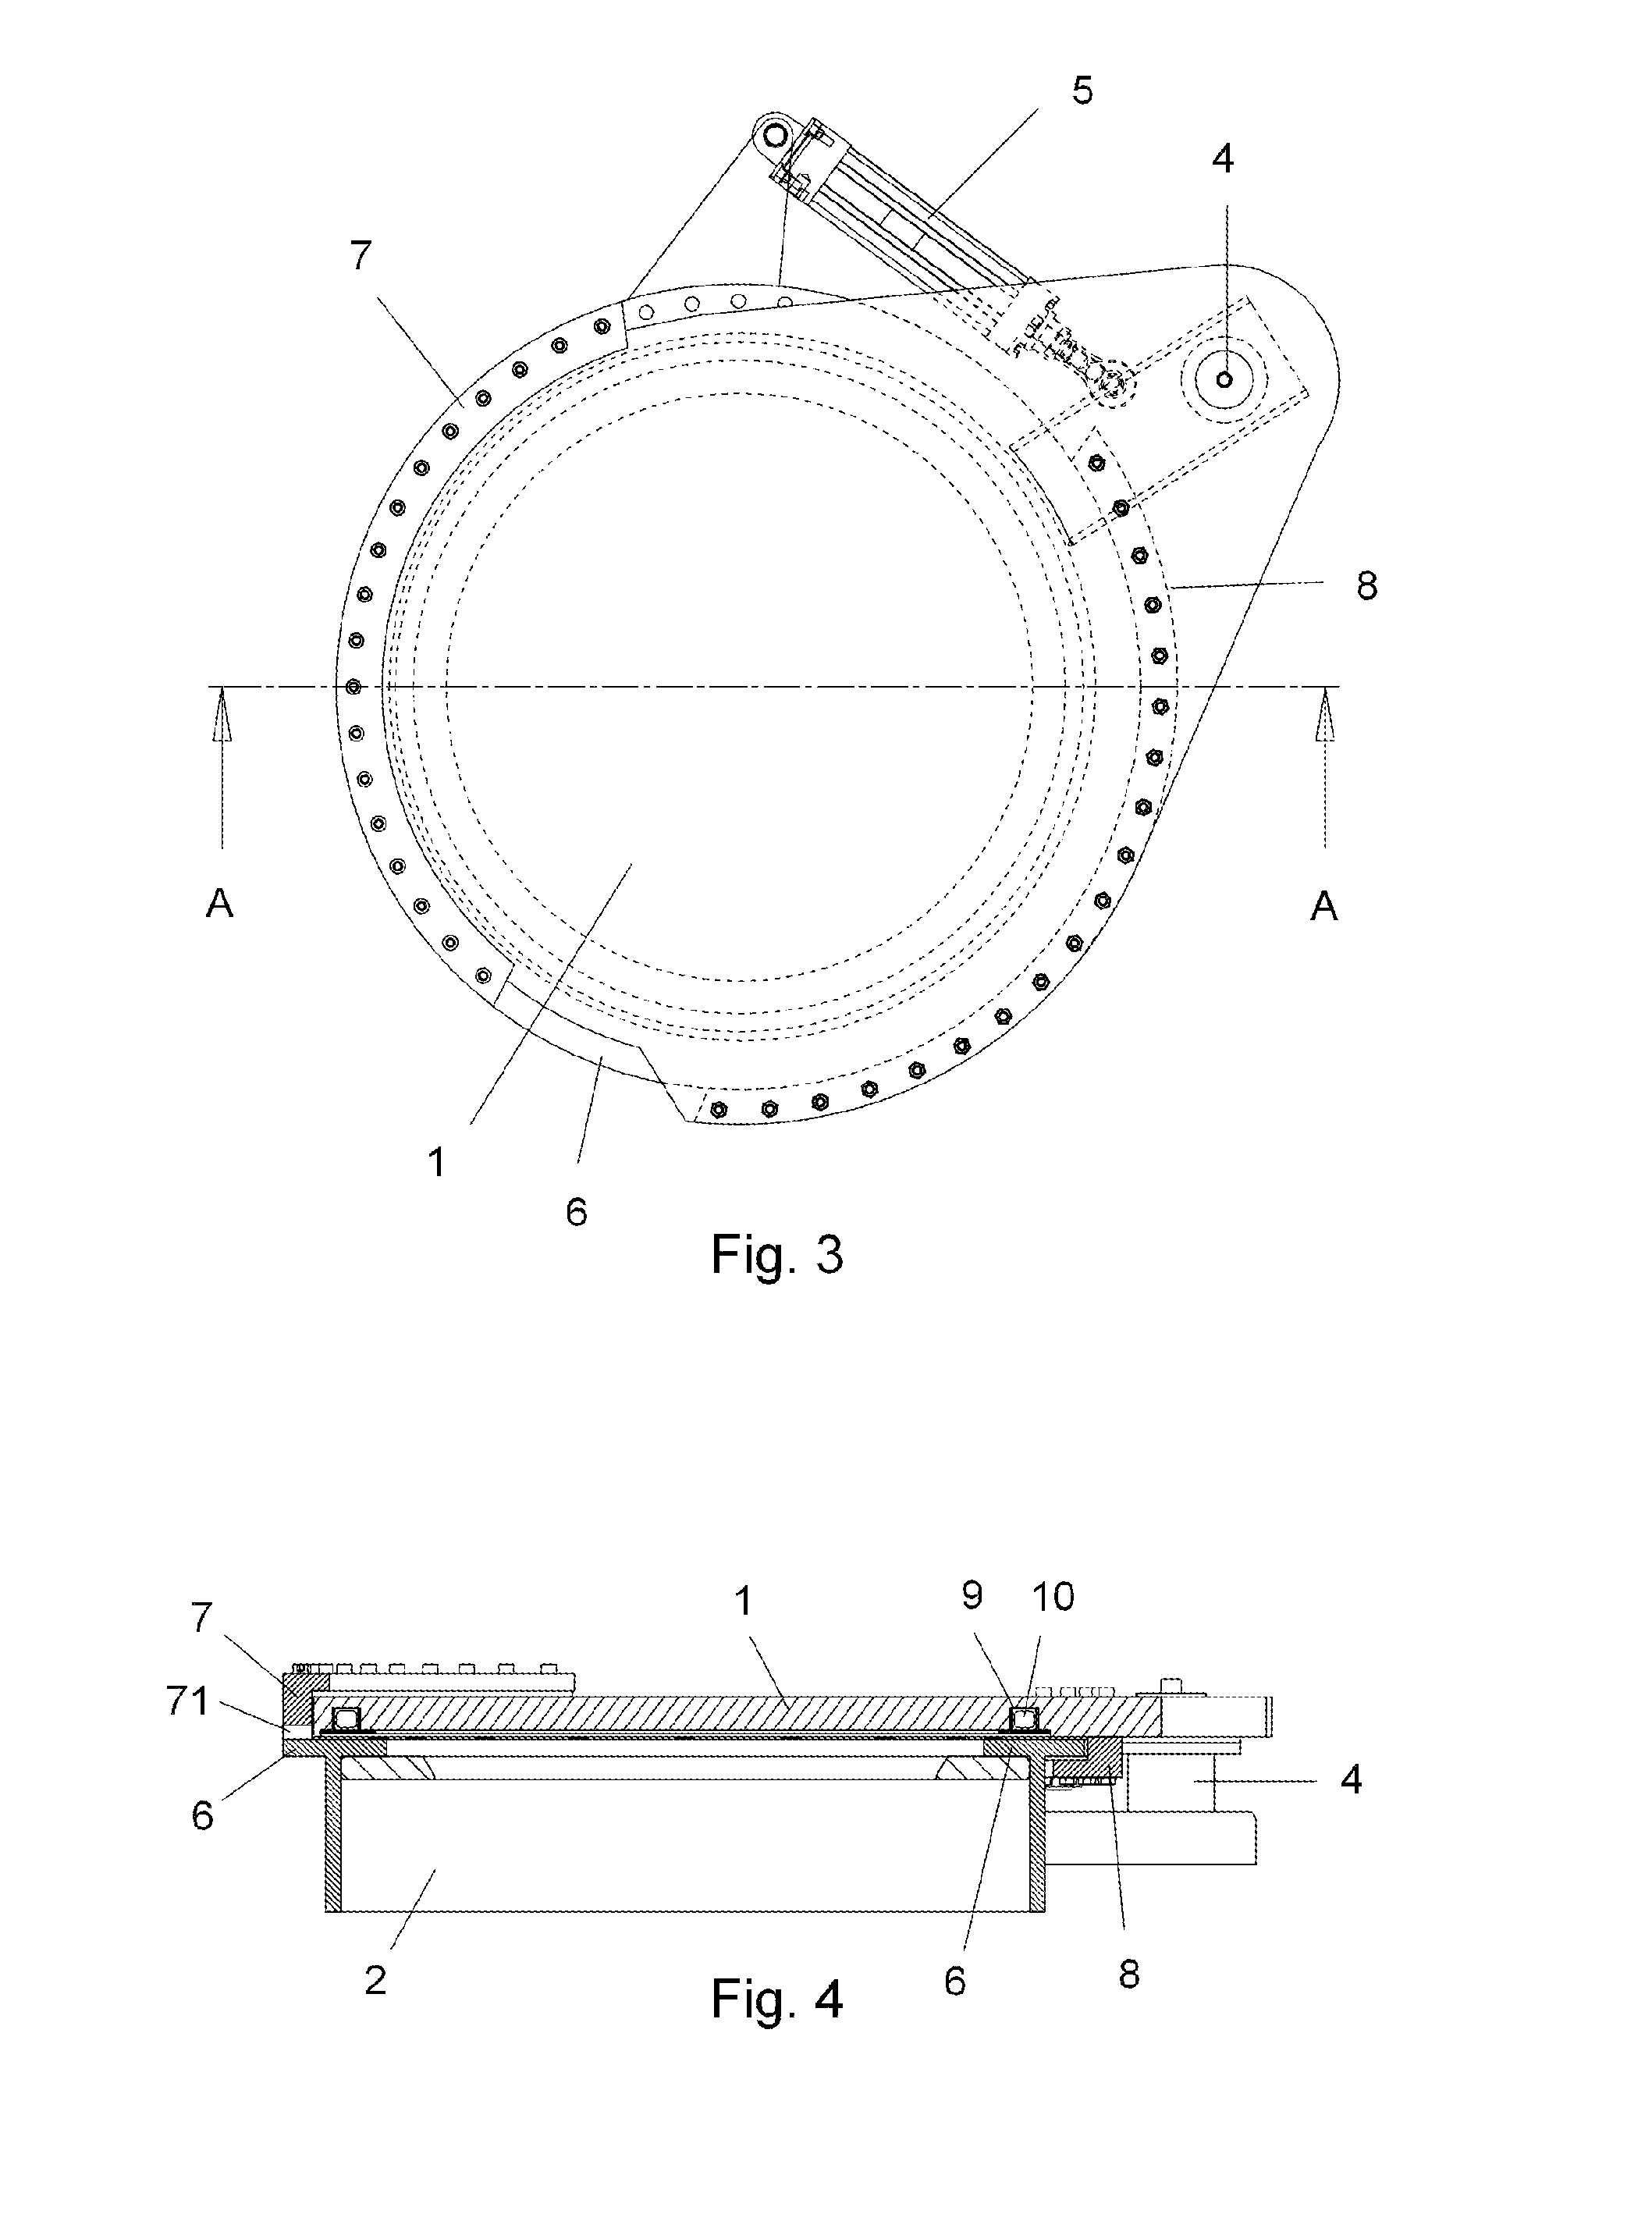 Hermetic sealing system for containers